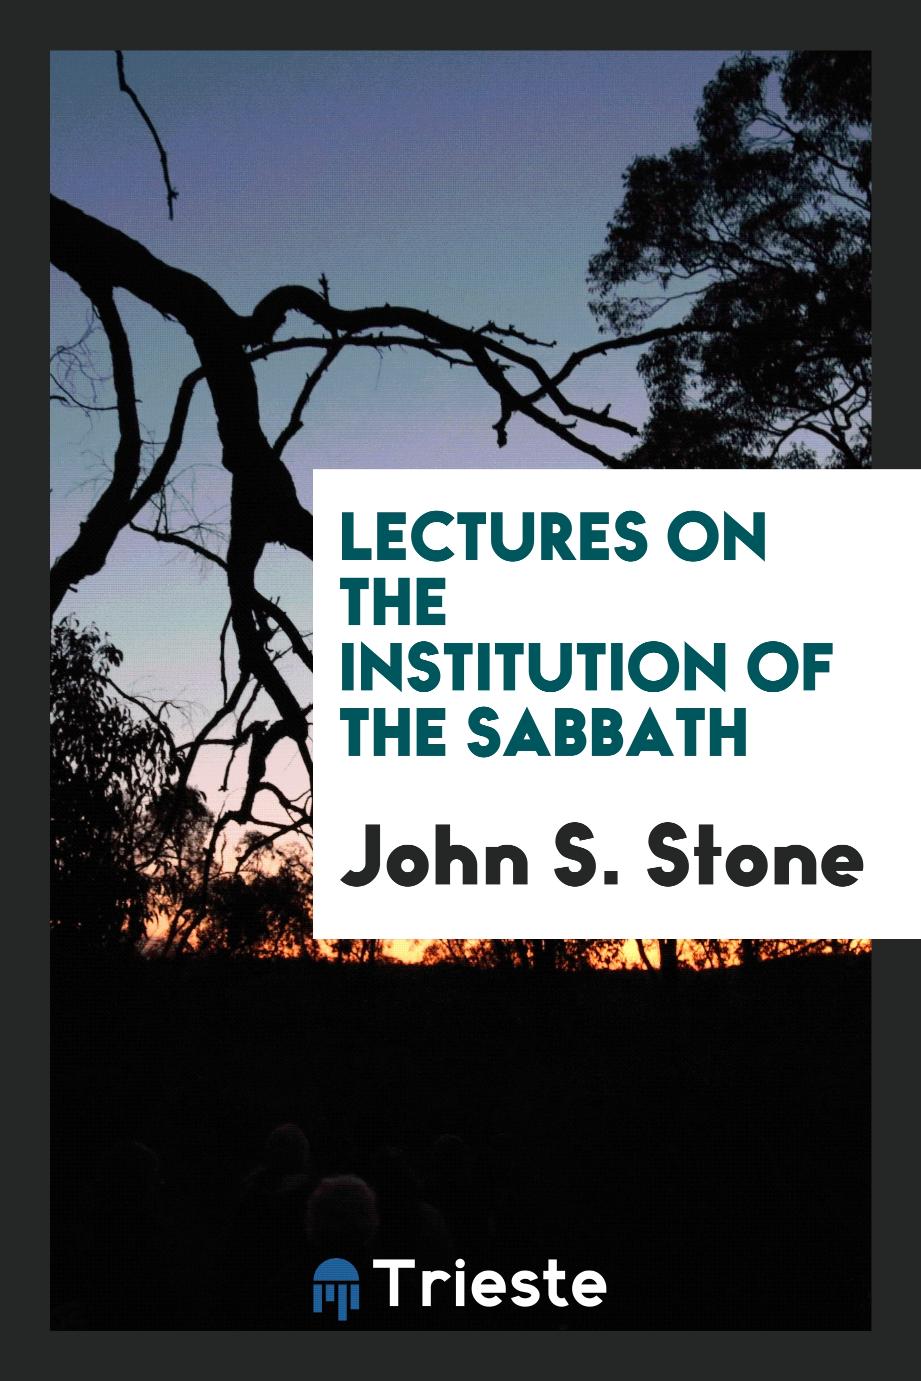 Lectures on the Institution of the Sabbath